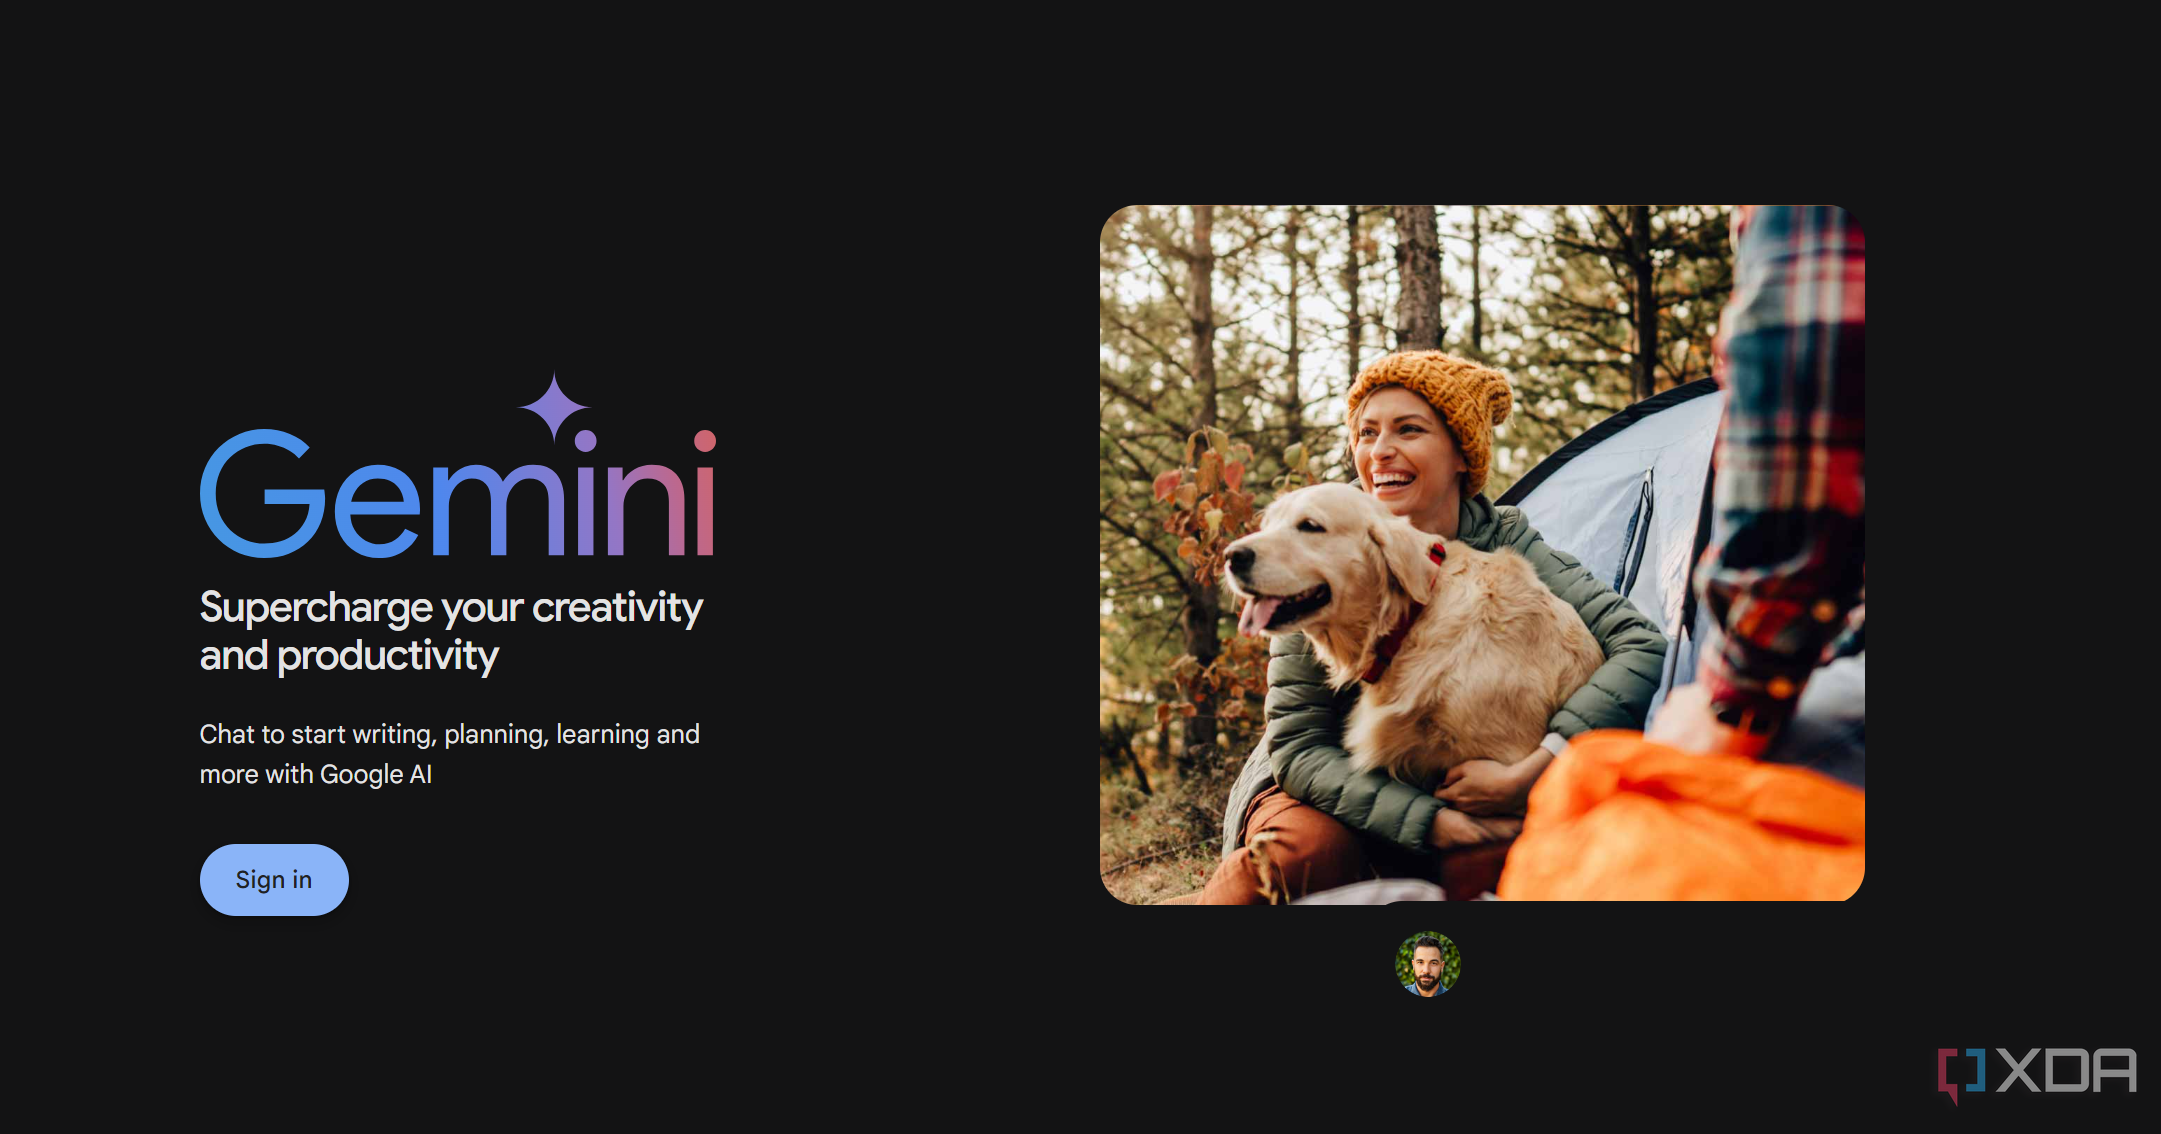 Sign in page for Google Gemini